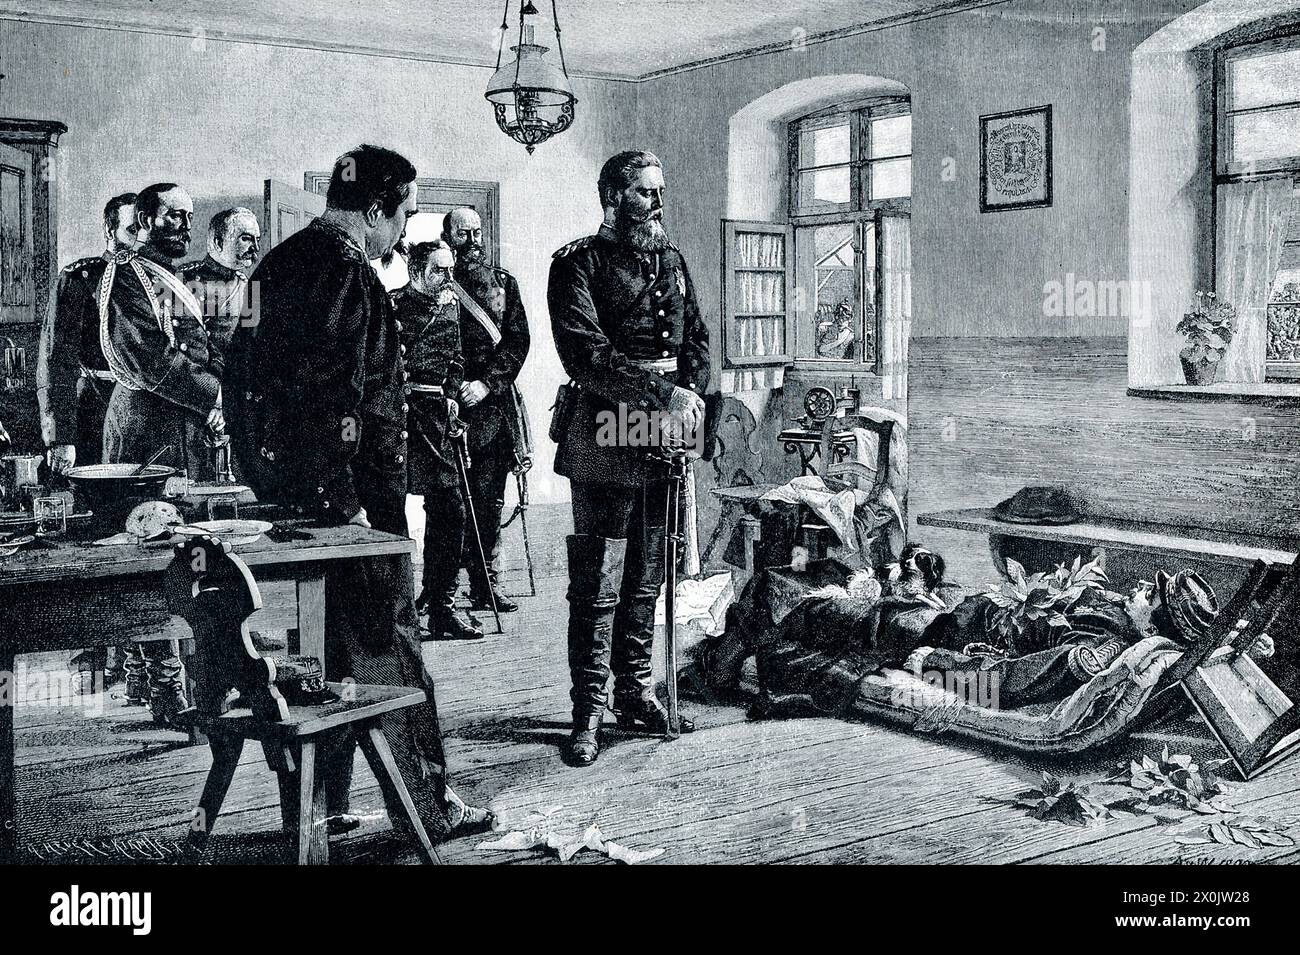 The early 1900s caption reads: “Prince Frederick viewing the body of General Douay. The Prussian crown prince Frederick, afterward the Peace emperor Frederick III, was one of the chief generals and heroes of the Franco-Prussian war of 1870. He won its first battle at Weissenburg. The French commander, General Douay, fell fighting bravely, and in their hurried retreat his soldiers left his body behind, guarded only by his faithful little dog. In the illustration the victor and his staff with uncovered heads, saluting with respect the body of their gallant foe.” Stock Photo